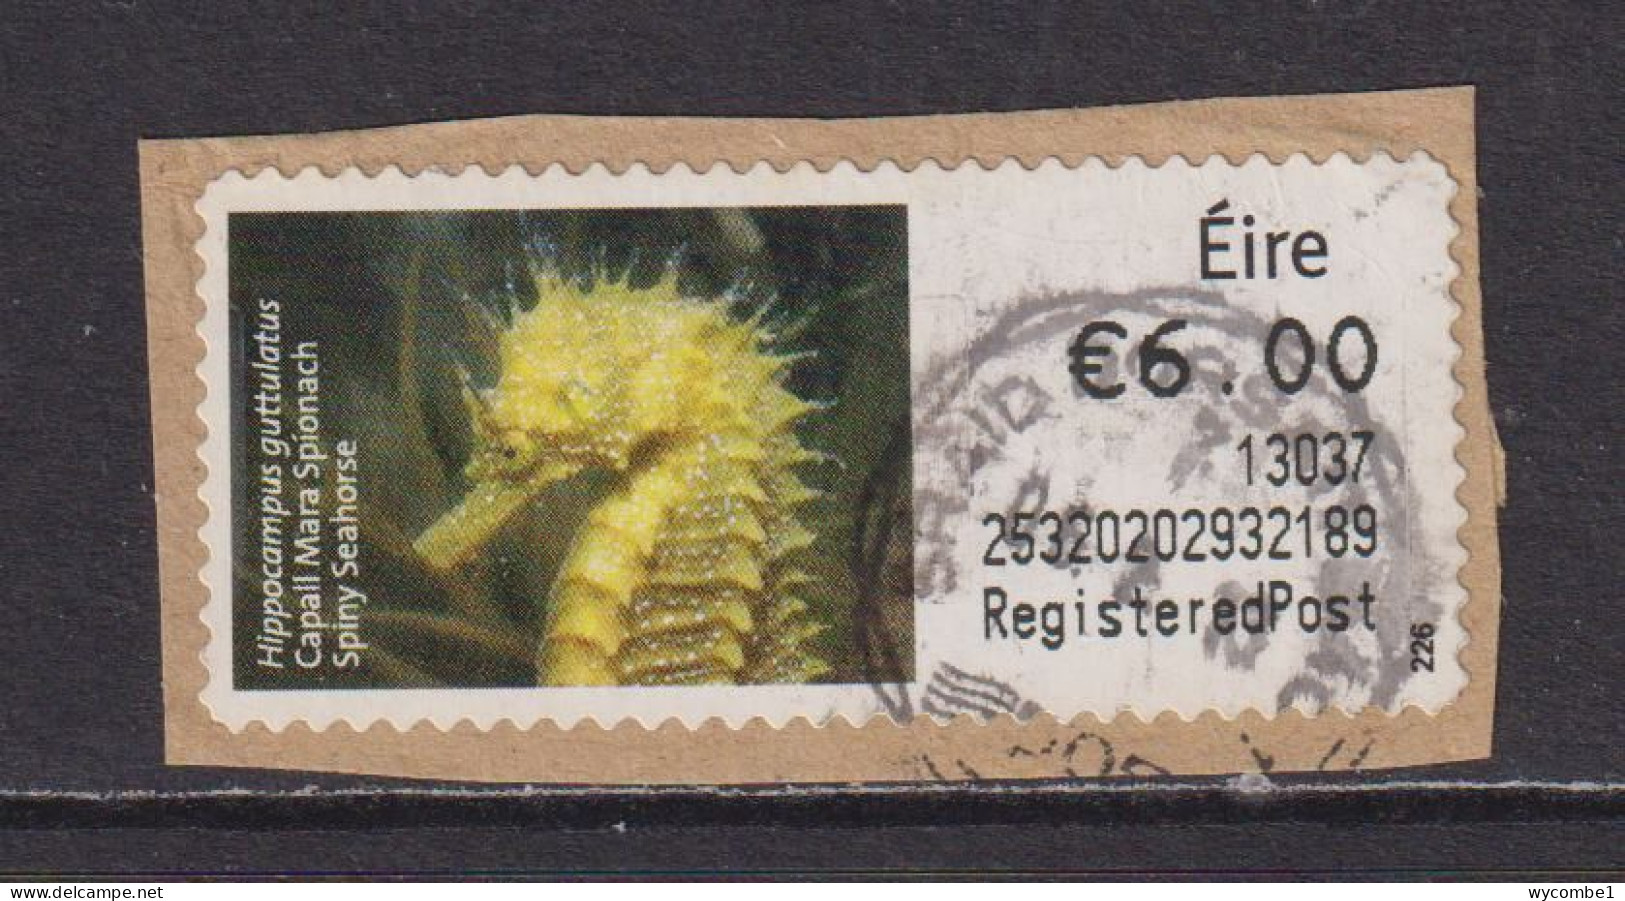 IRELAND  -  2012 Spiny Seahorse SOAR (Stamp On A Roll)  CDS  Used On Piece As Scan - Usados